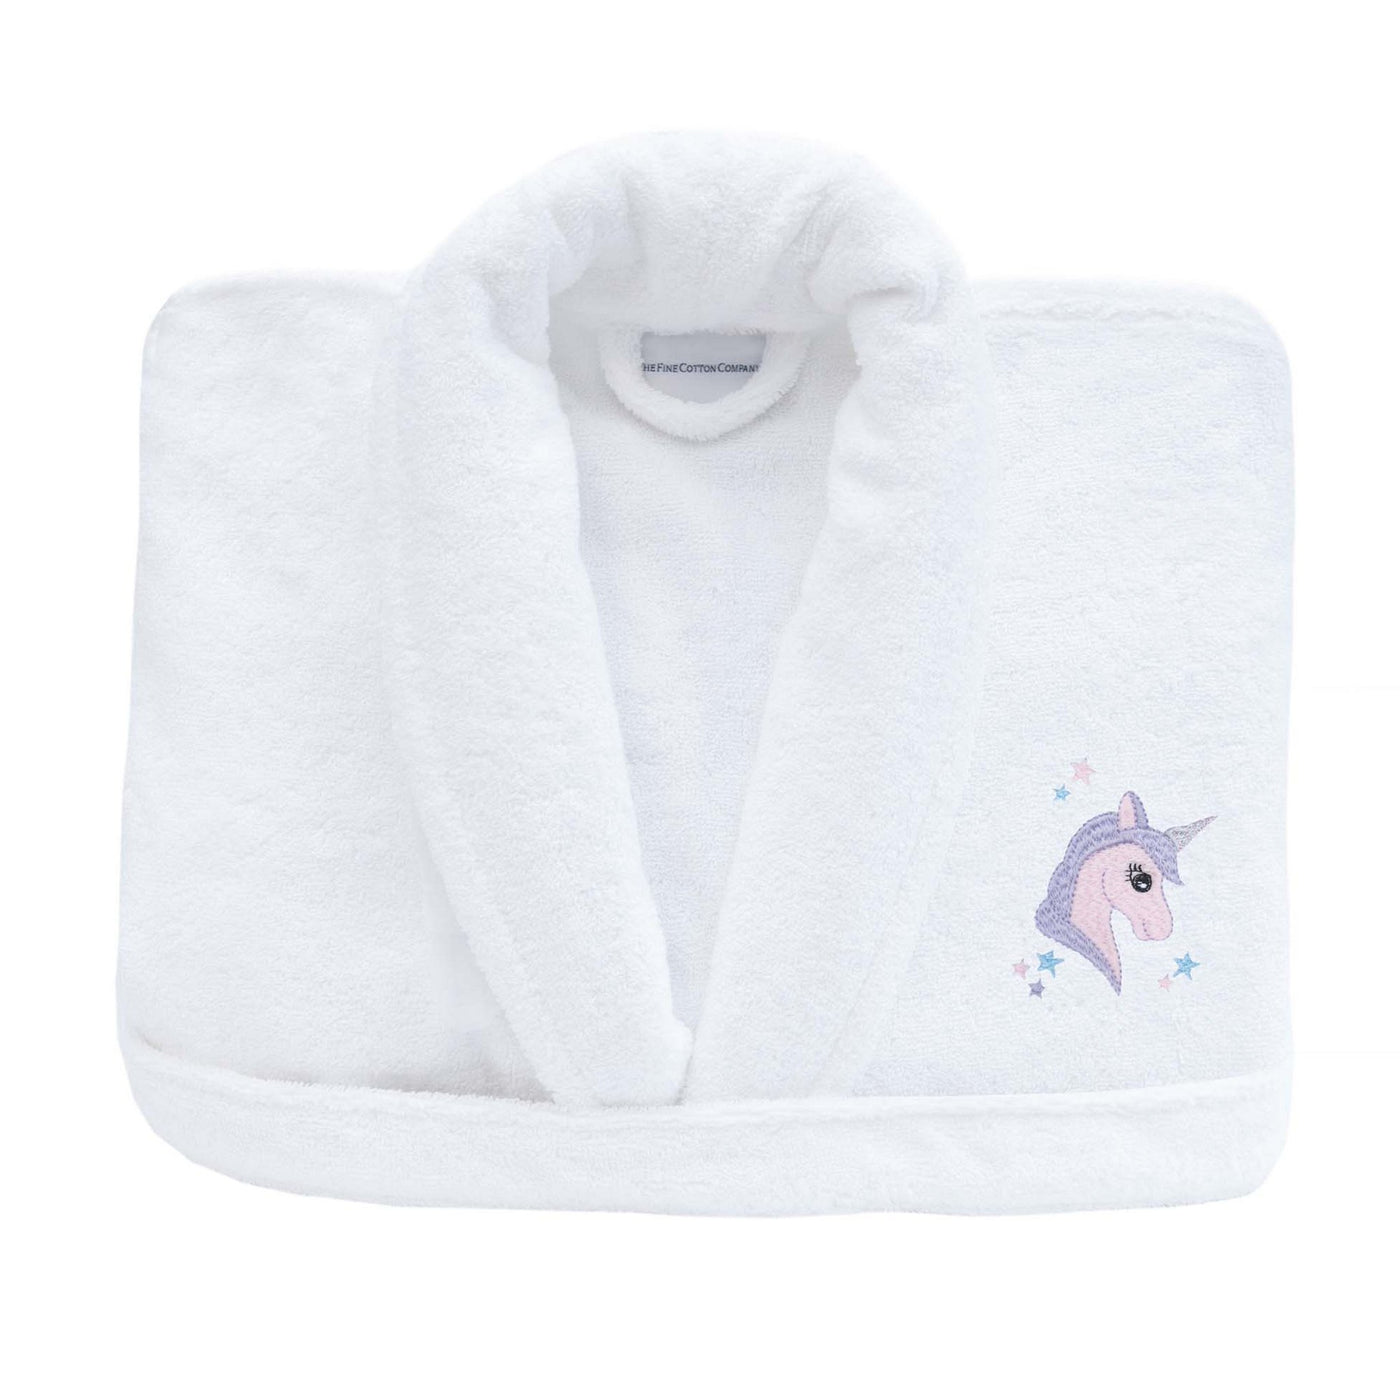 Unicorn or Motif Embroidered Bath Robe Collection